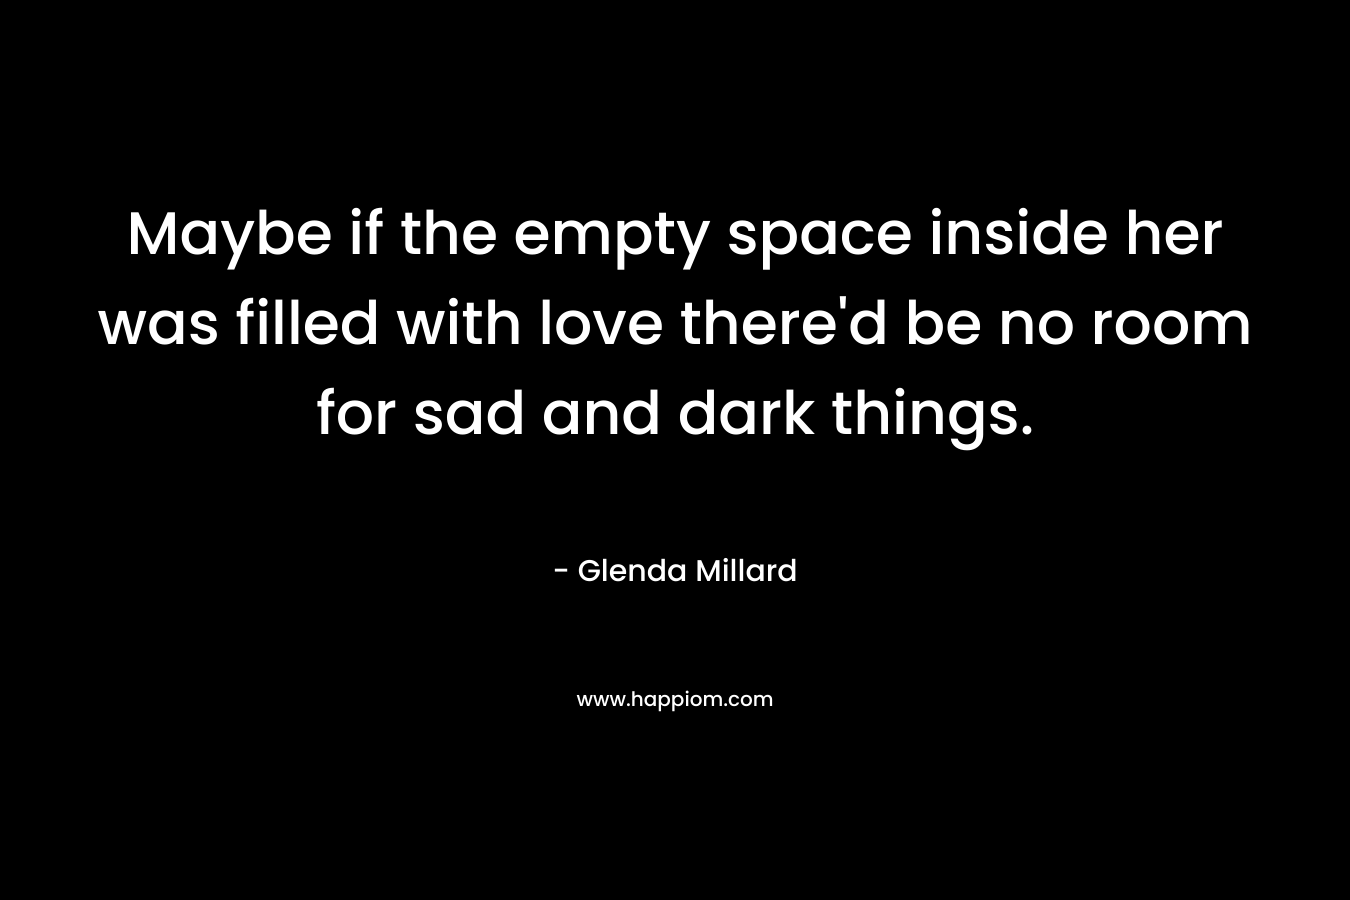 Maybe if the empty space inside her was filled with love there'd be no room for sad and dark things.